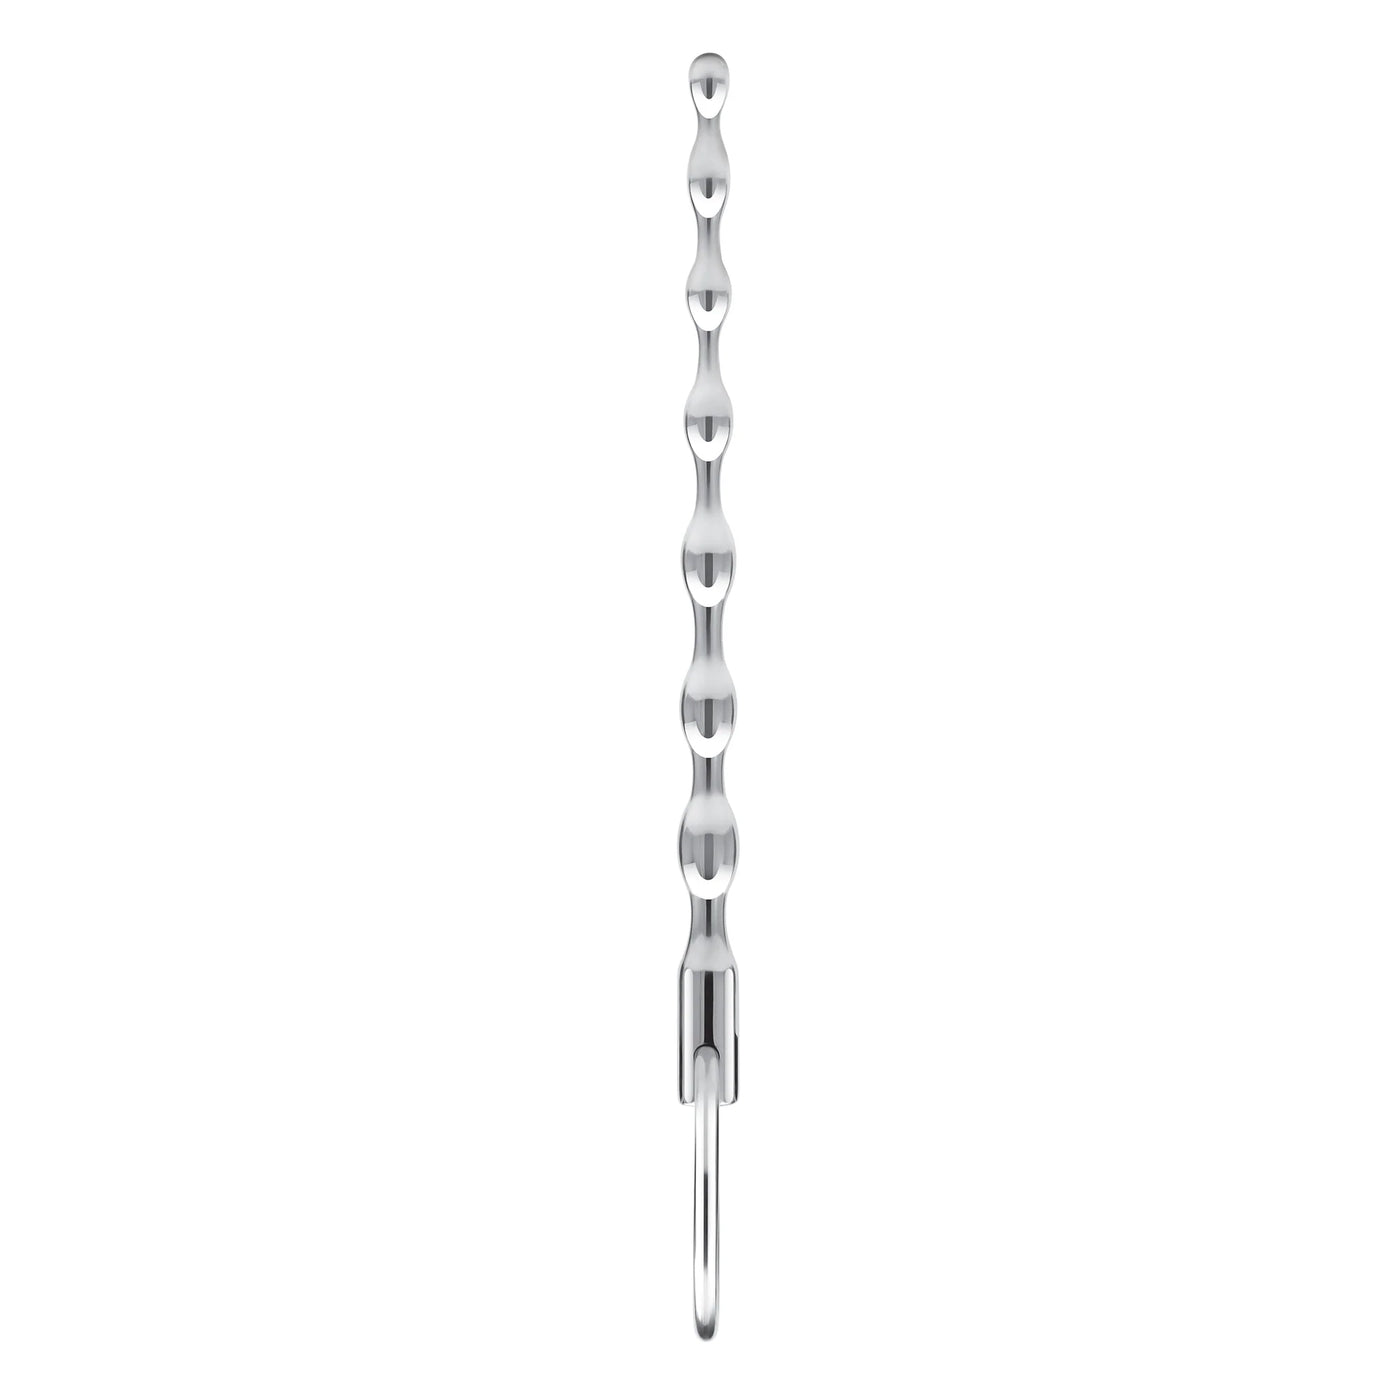 Ribbed Urethral Sound, 4.25-Inch Stainless Steel - Hamilton Park Electronics